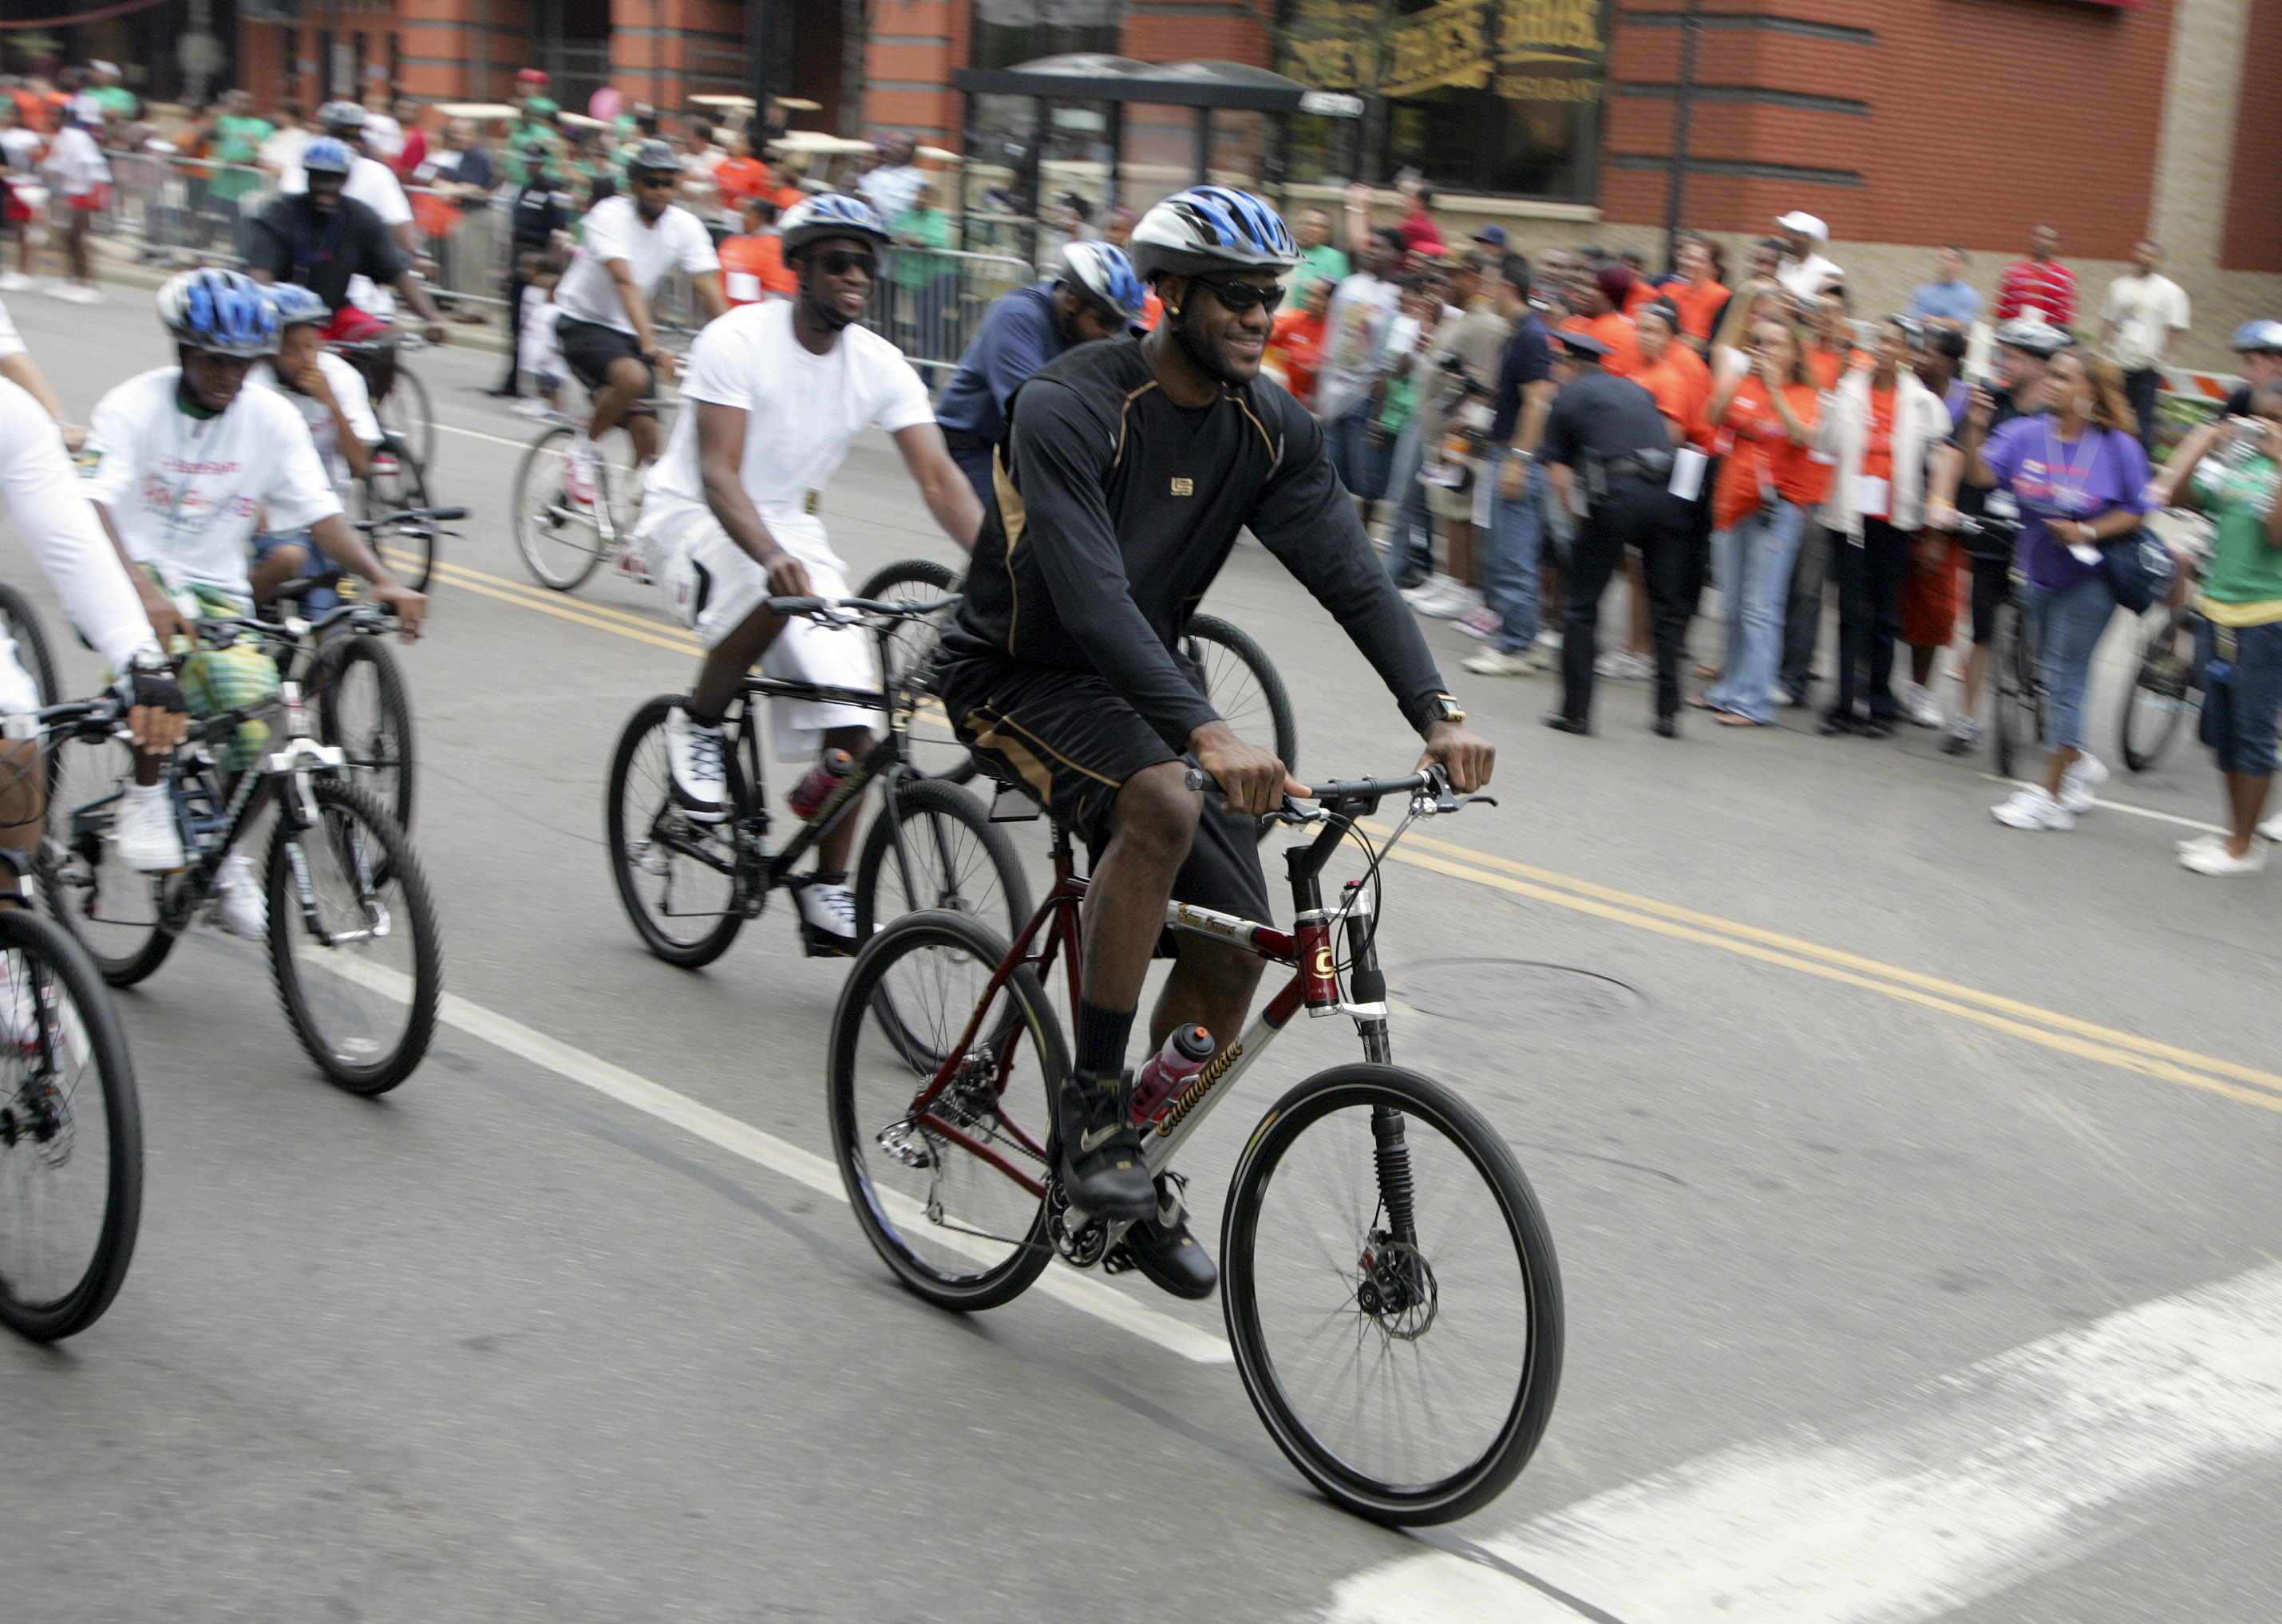 LeBron James takes off on an eight mile ride during the State Farm King for Kids Bikeathon in Akron Saturday, June 21, 2008. The popular family-friendly fundraising event, which is made possible with the support and cooperation of the City of Akron, will recognize and reward Akron-area children who have achieved academic success, improved their physical fitness and made important contributions to the community.    (Joshua Gunter/ The Plain Dealer)